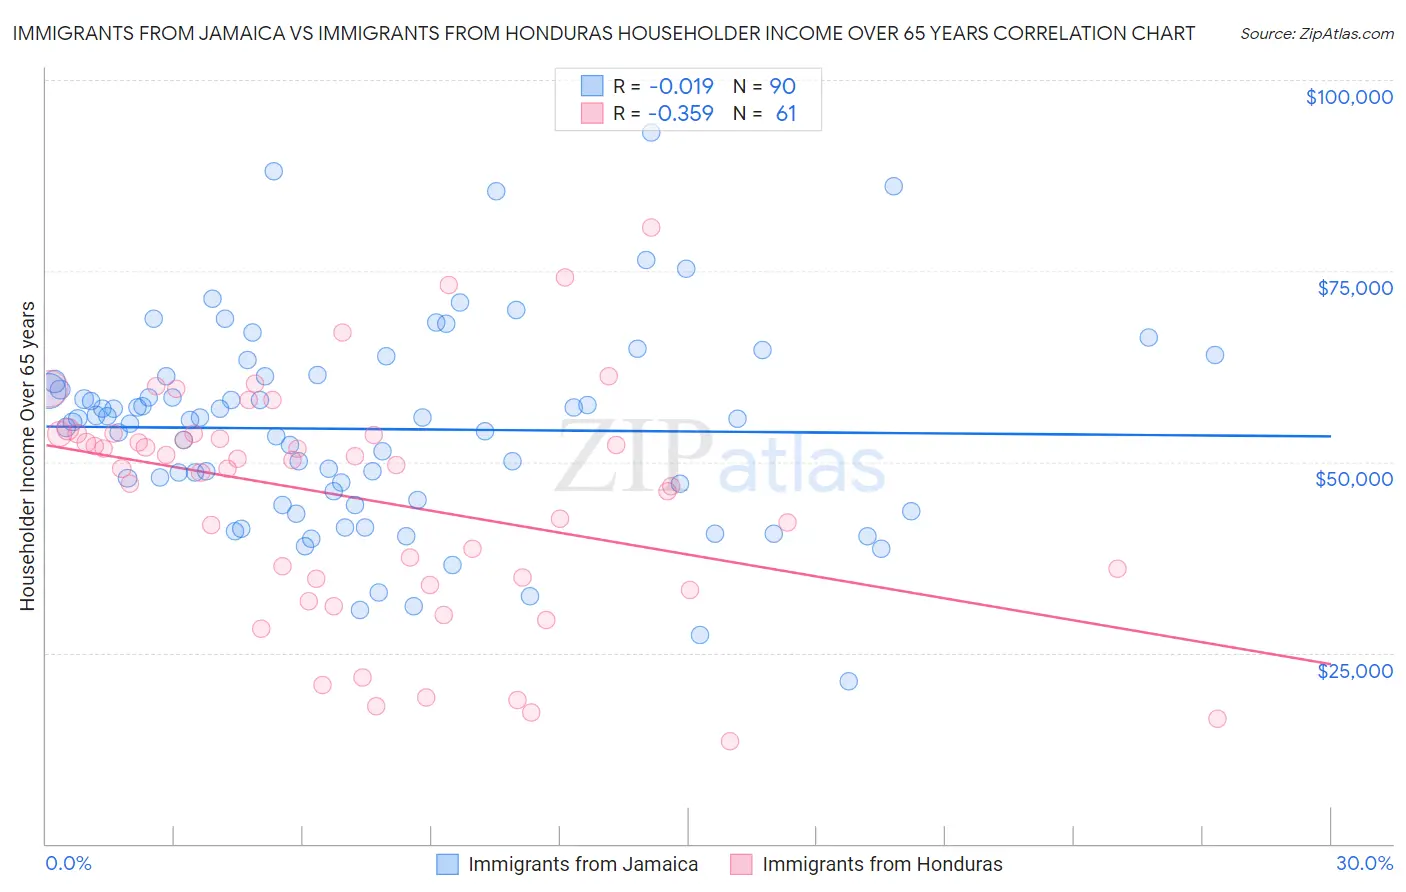 Immigrants from Jamaica vs Immigrants from Honduras Householder Income Over 65 years